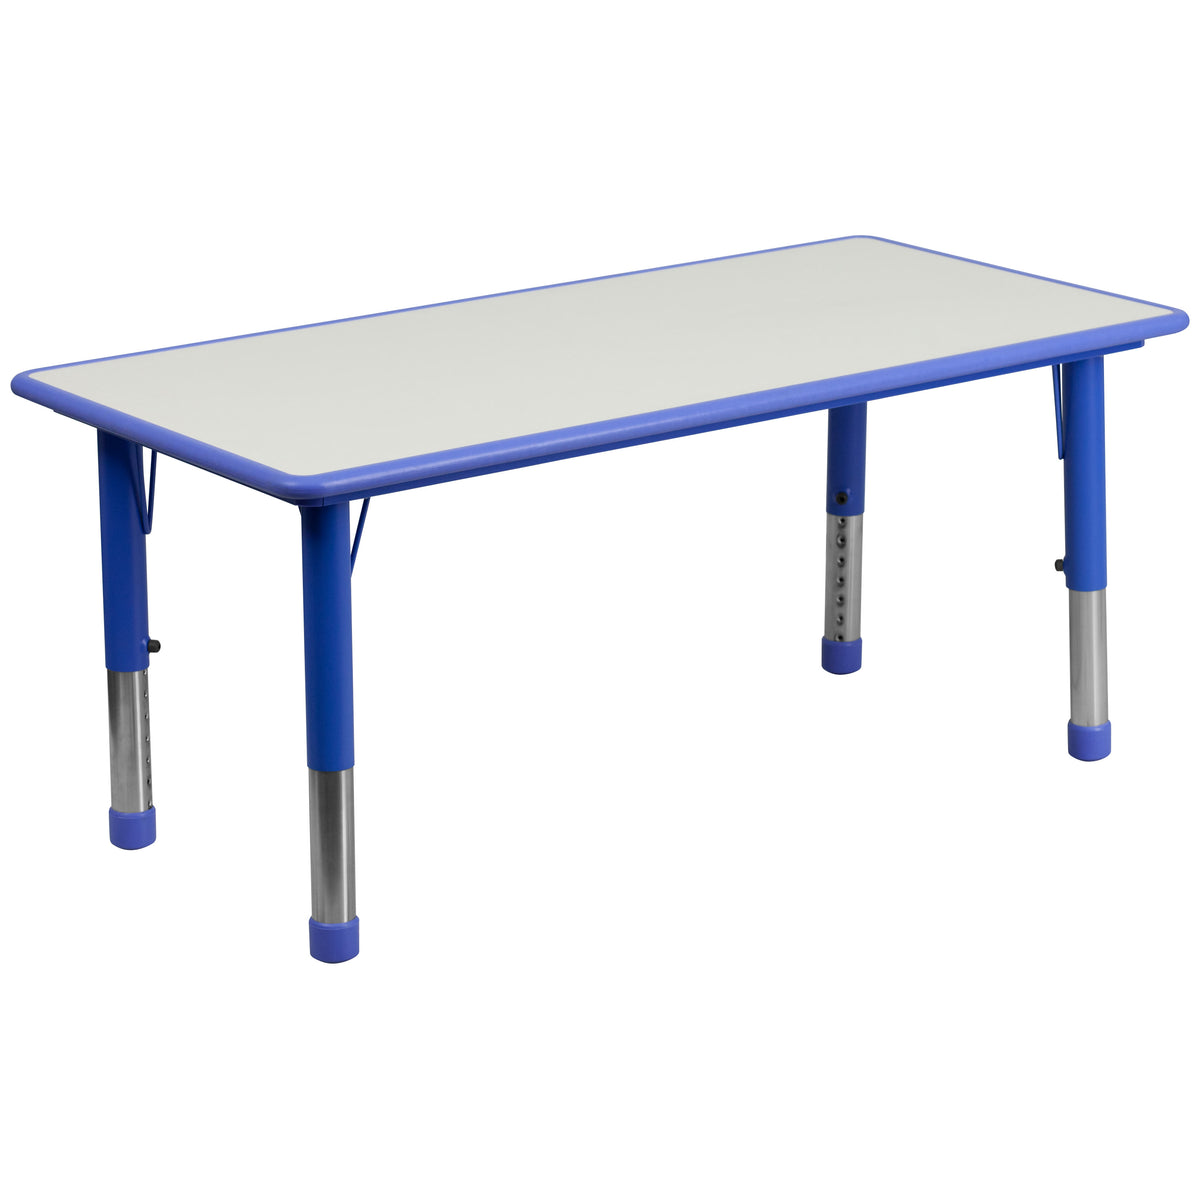 Blue |#| 23.625inchW x 47.25inchL Rectangular Blue Plastic Activity Table with Grey Top